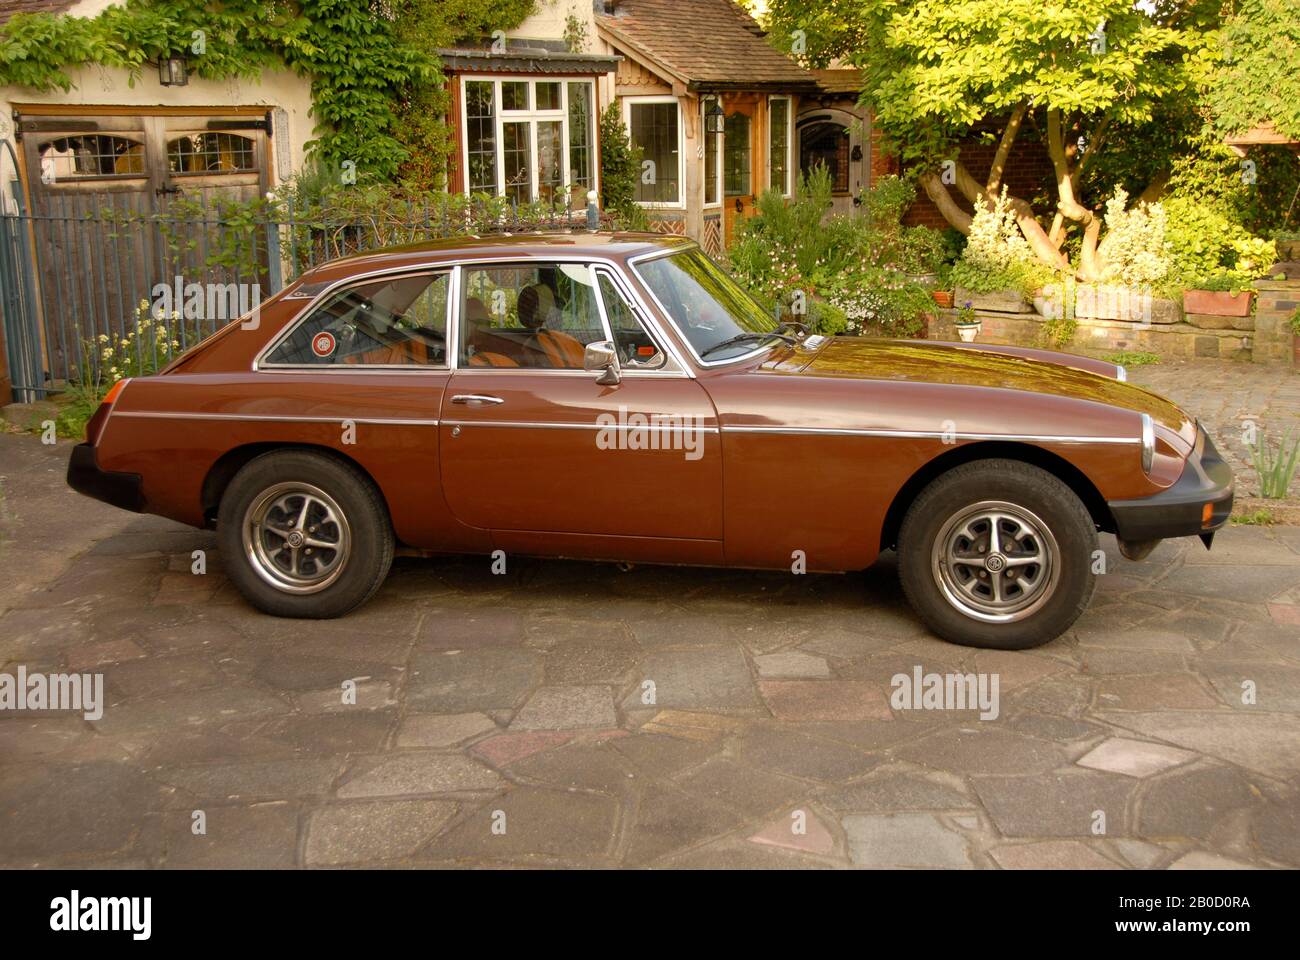 Russet brown MGB Gt sports car on drive of suburban house Stock Photo